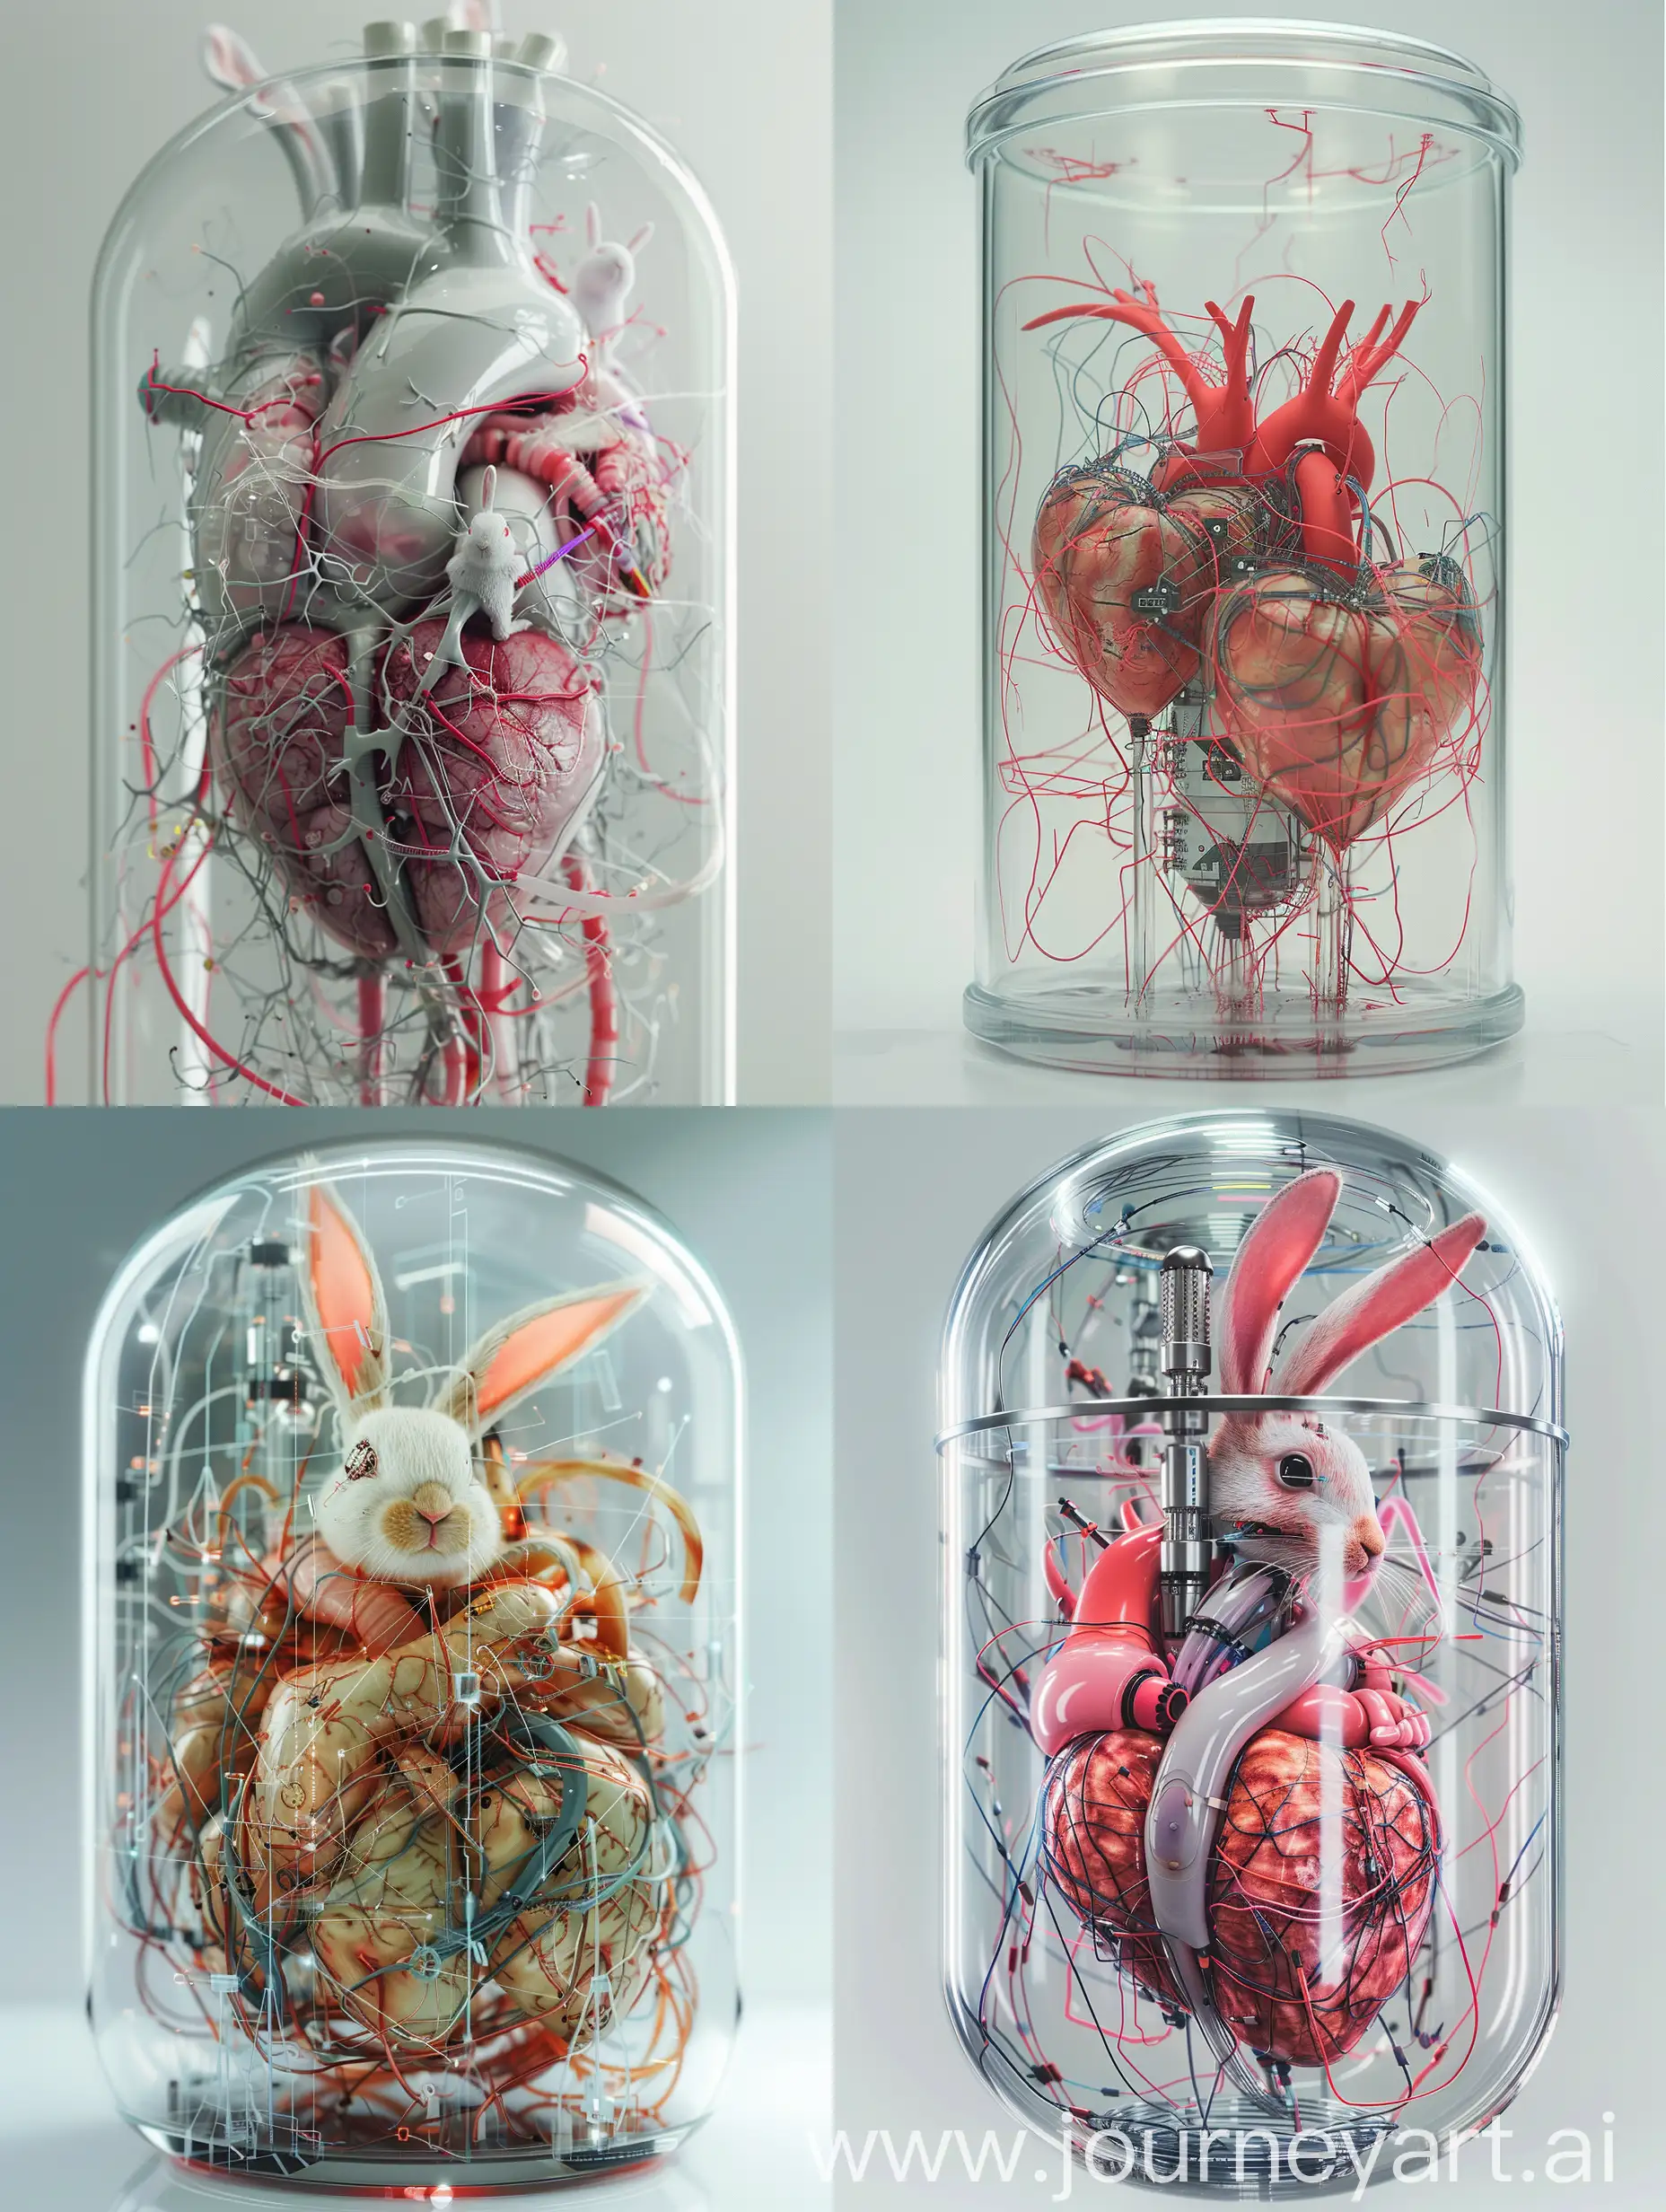 Futuristic-Cybernetic-Heart-Sculpture-An-Artistic-Fusion-of-Science-and-Emotion